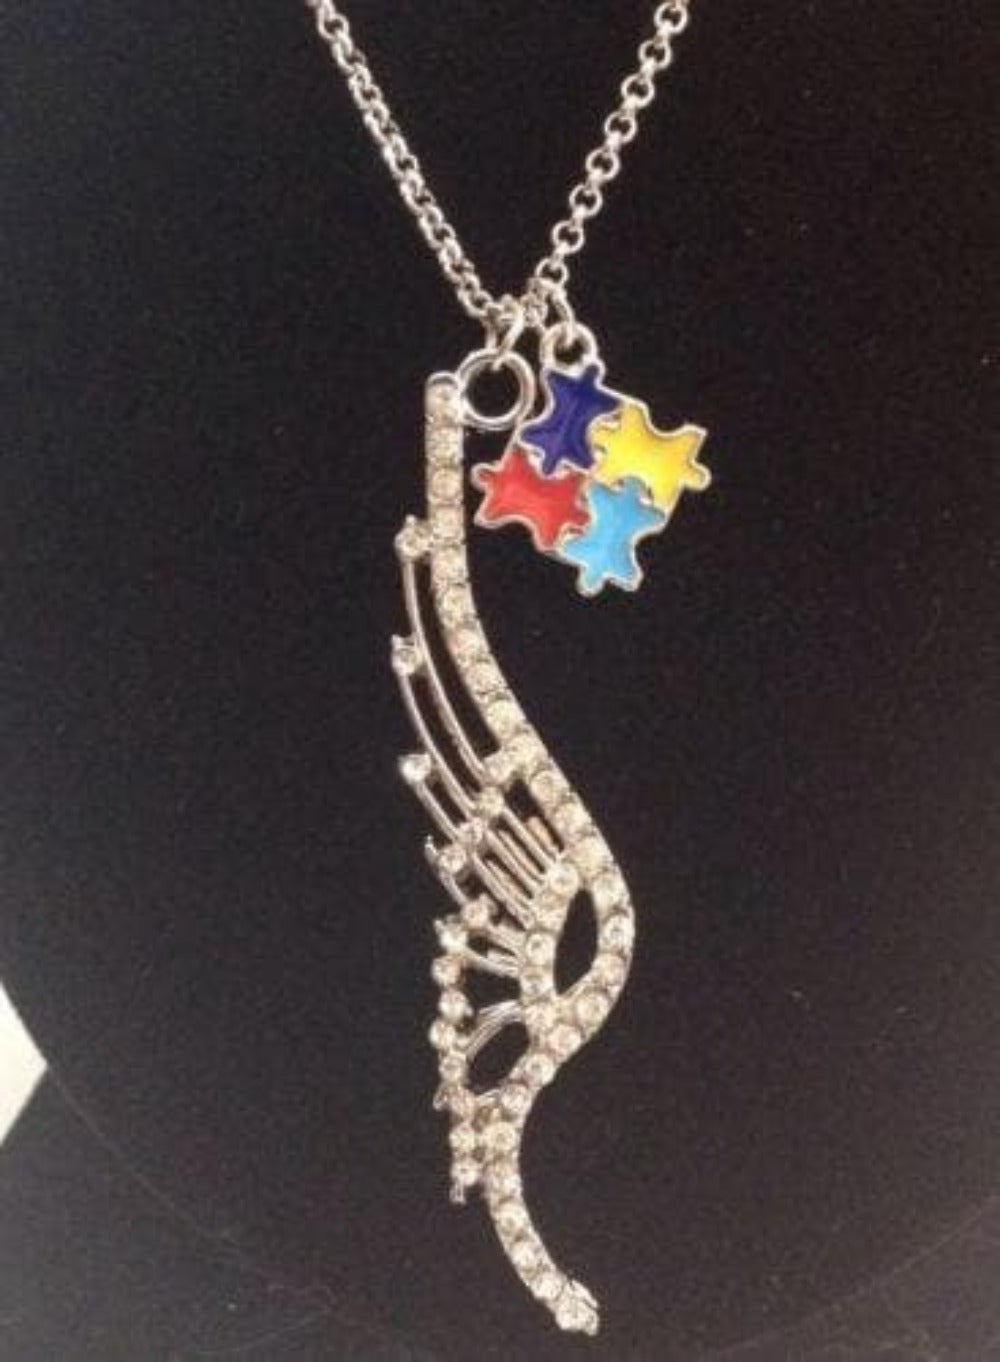 Crystal Angel Wing Charm with Colorful Puzzle Autism Awareness Charm Necklace - The House of Awareness